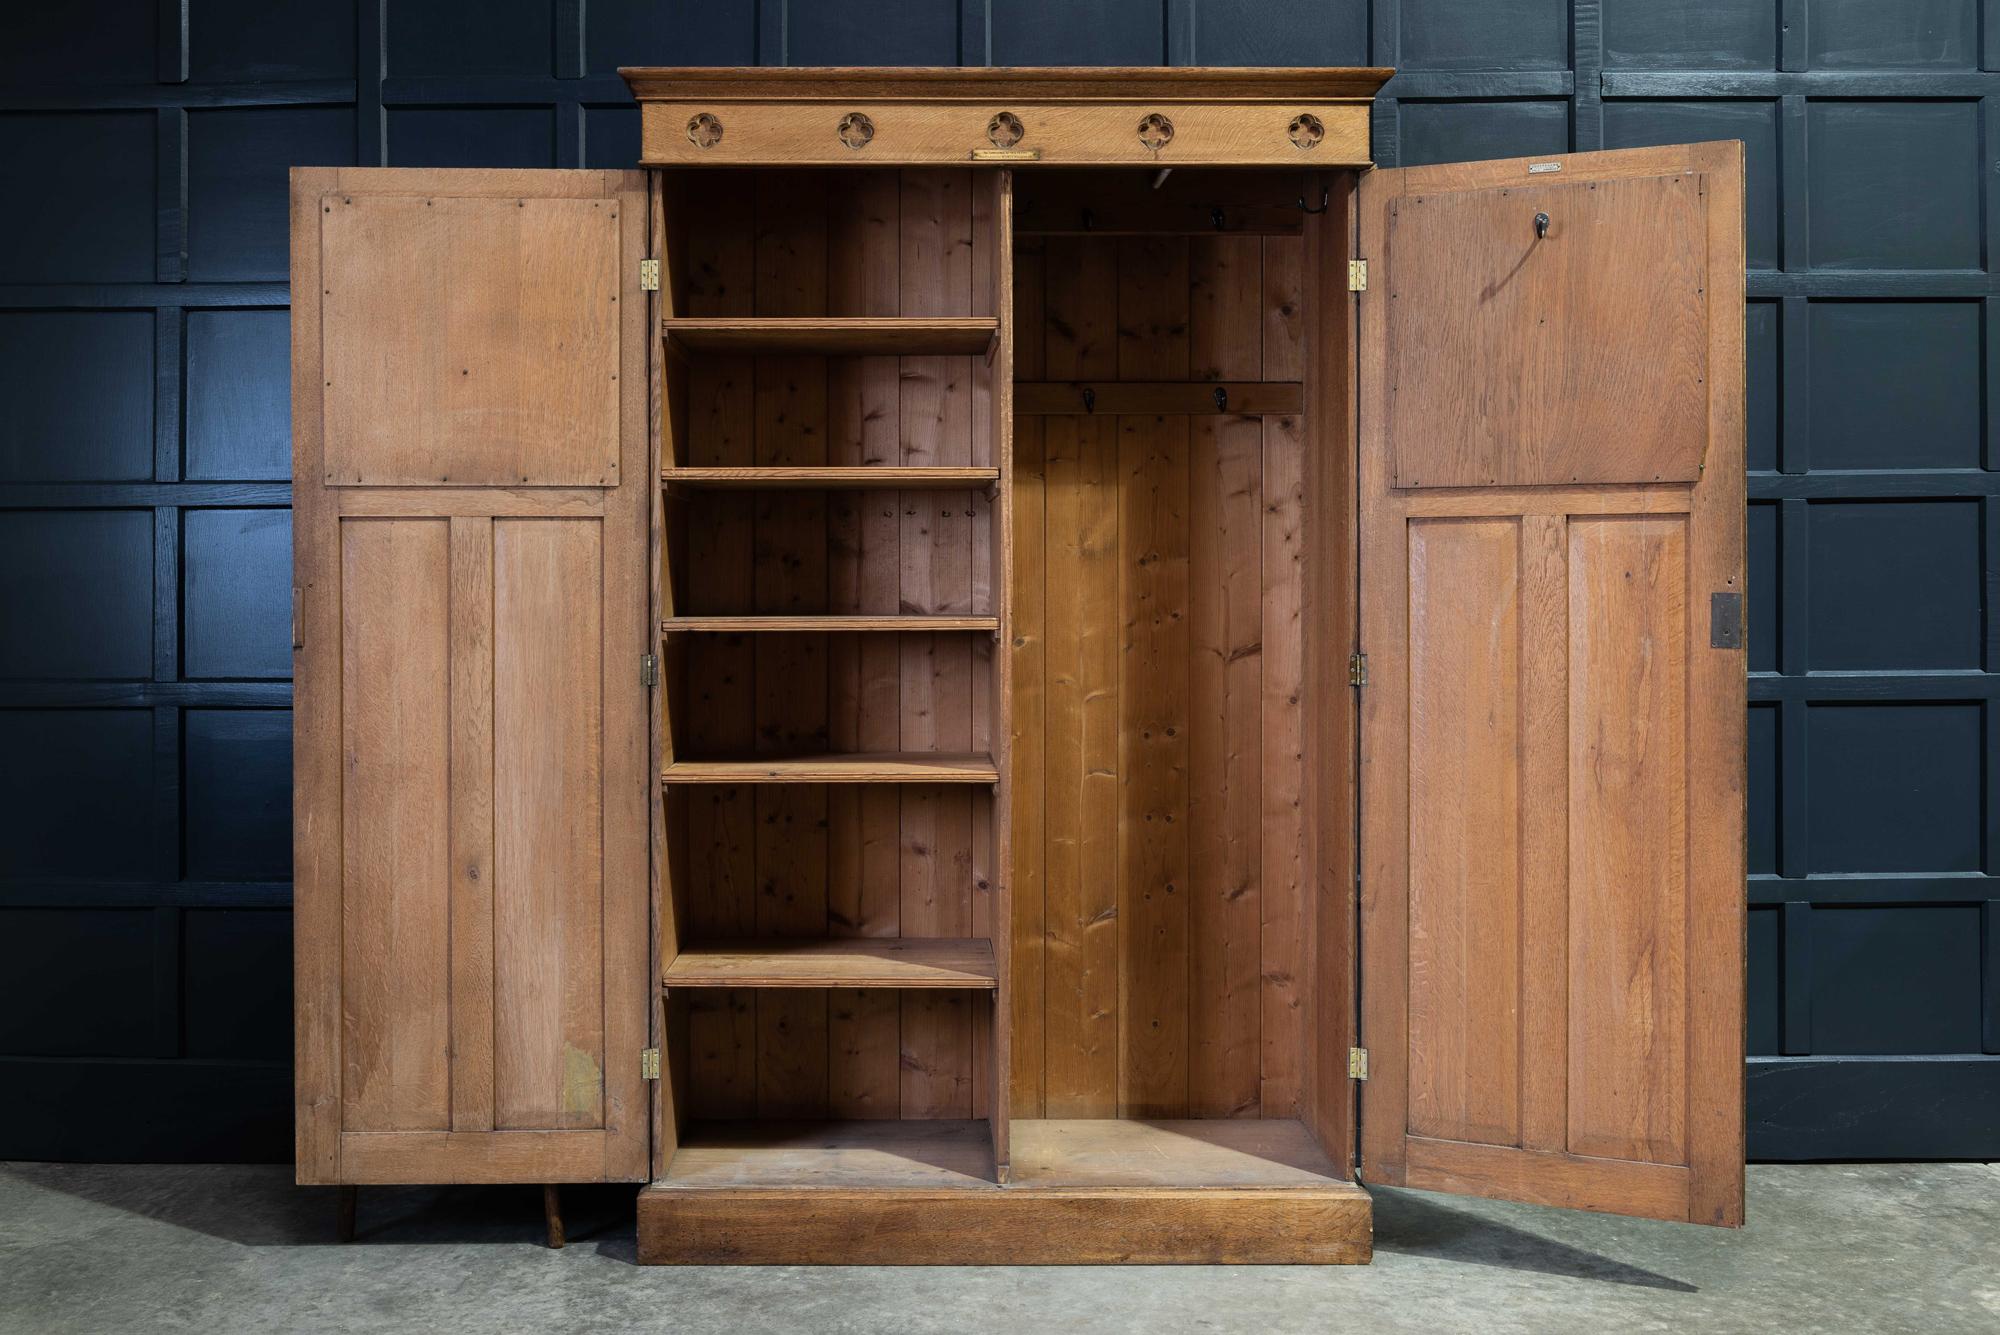 Arts & Crafts oak vestry cupboard,
circa 1915.

Oak Gothic Revival Arts & Crafts Vestry cupboard. Excellent quality and craftsmanship, lovely scale and narrow depth with lots of hanging hooks and a rail would make it ideal storage as a hall